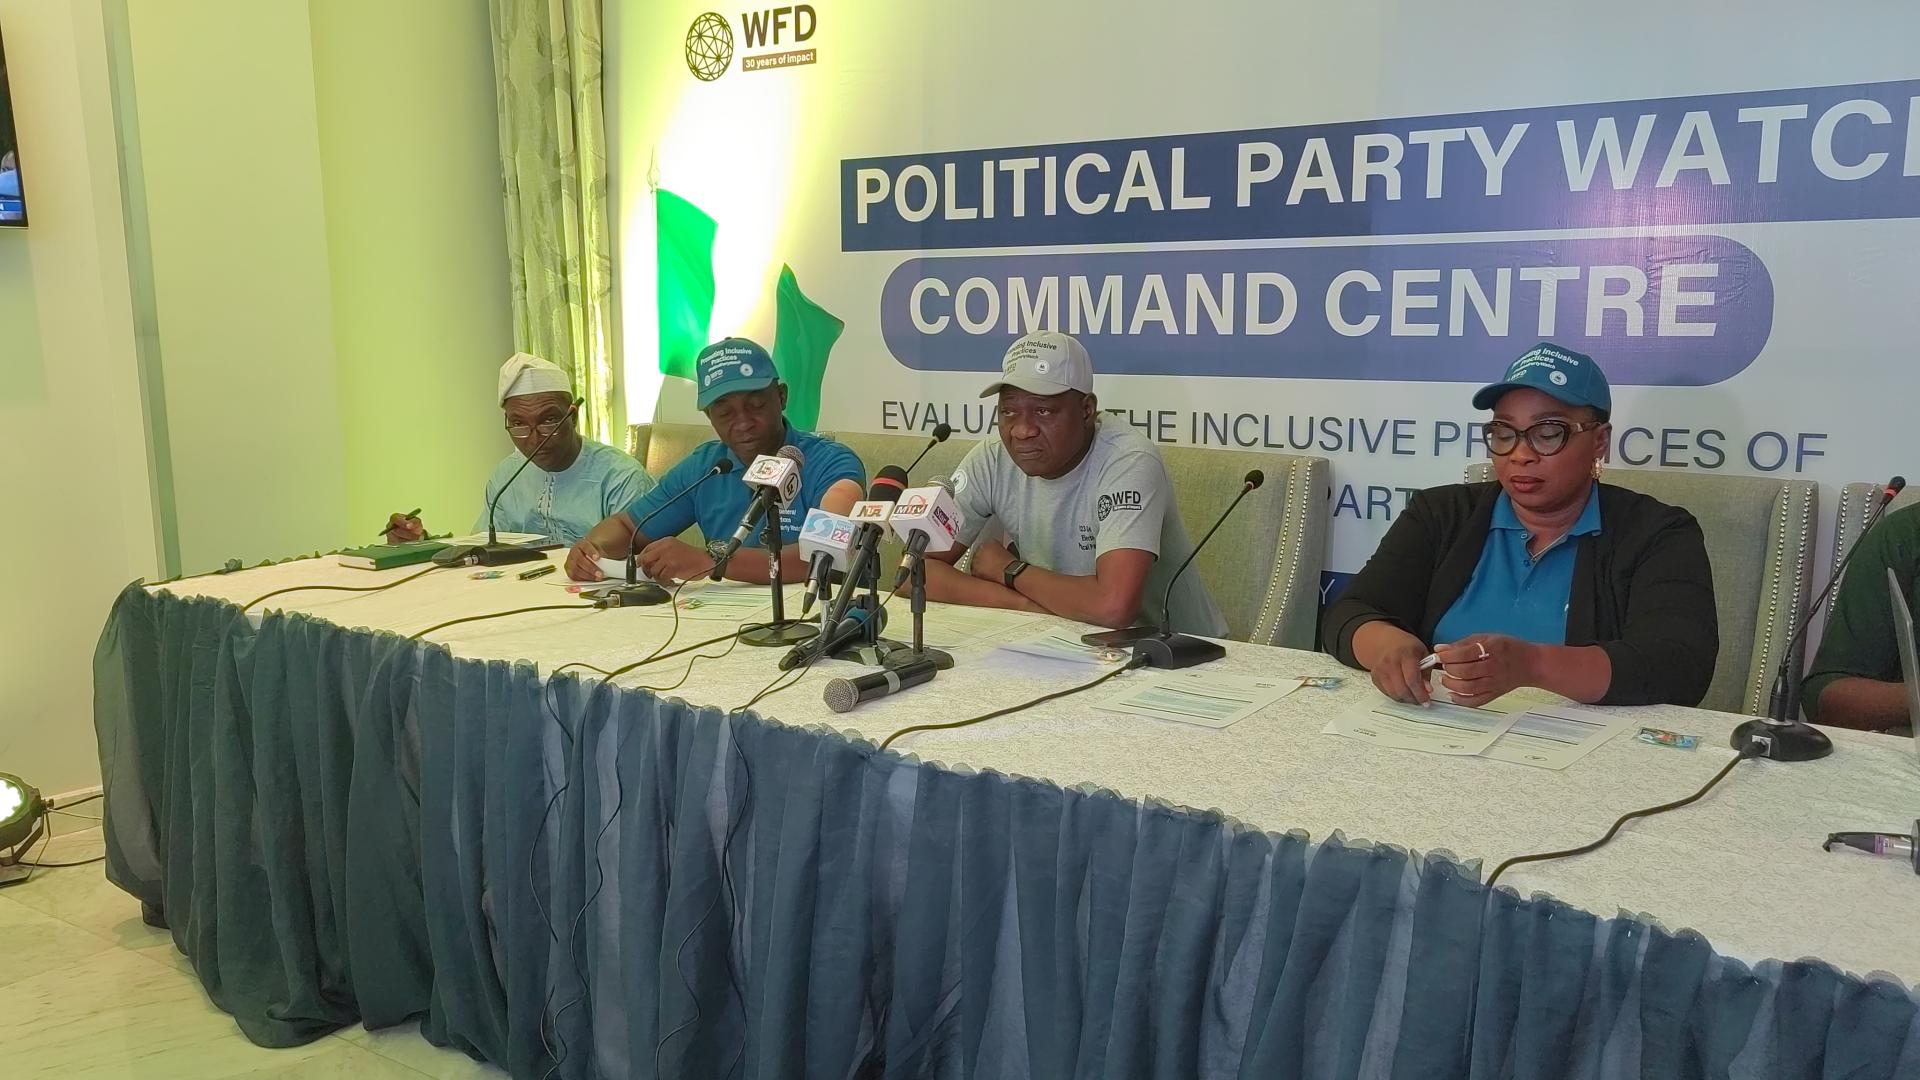 Political party watch command Centre during the Nigeria 2023 general Elections